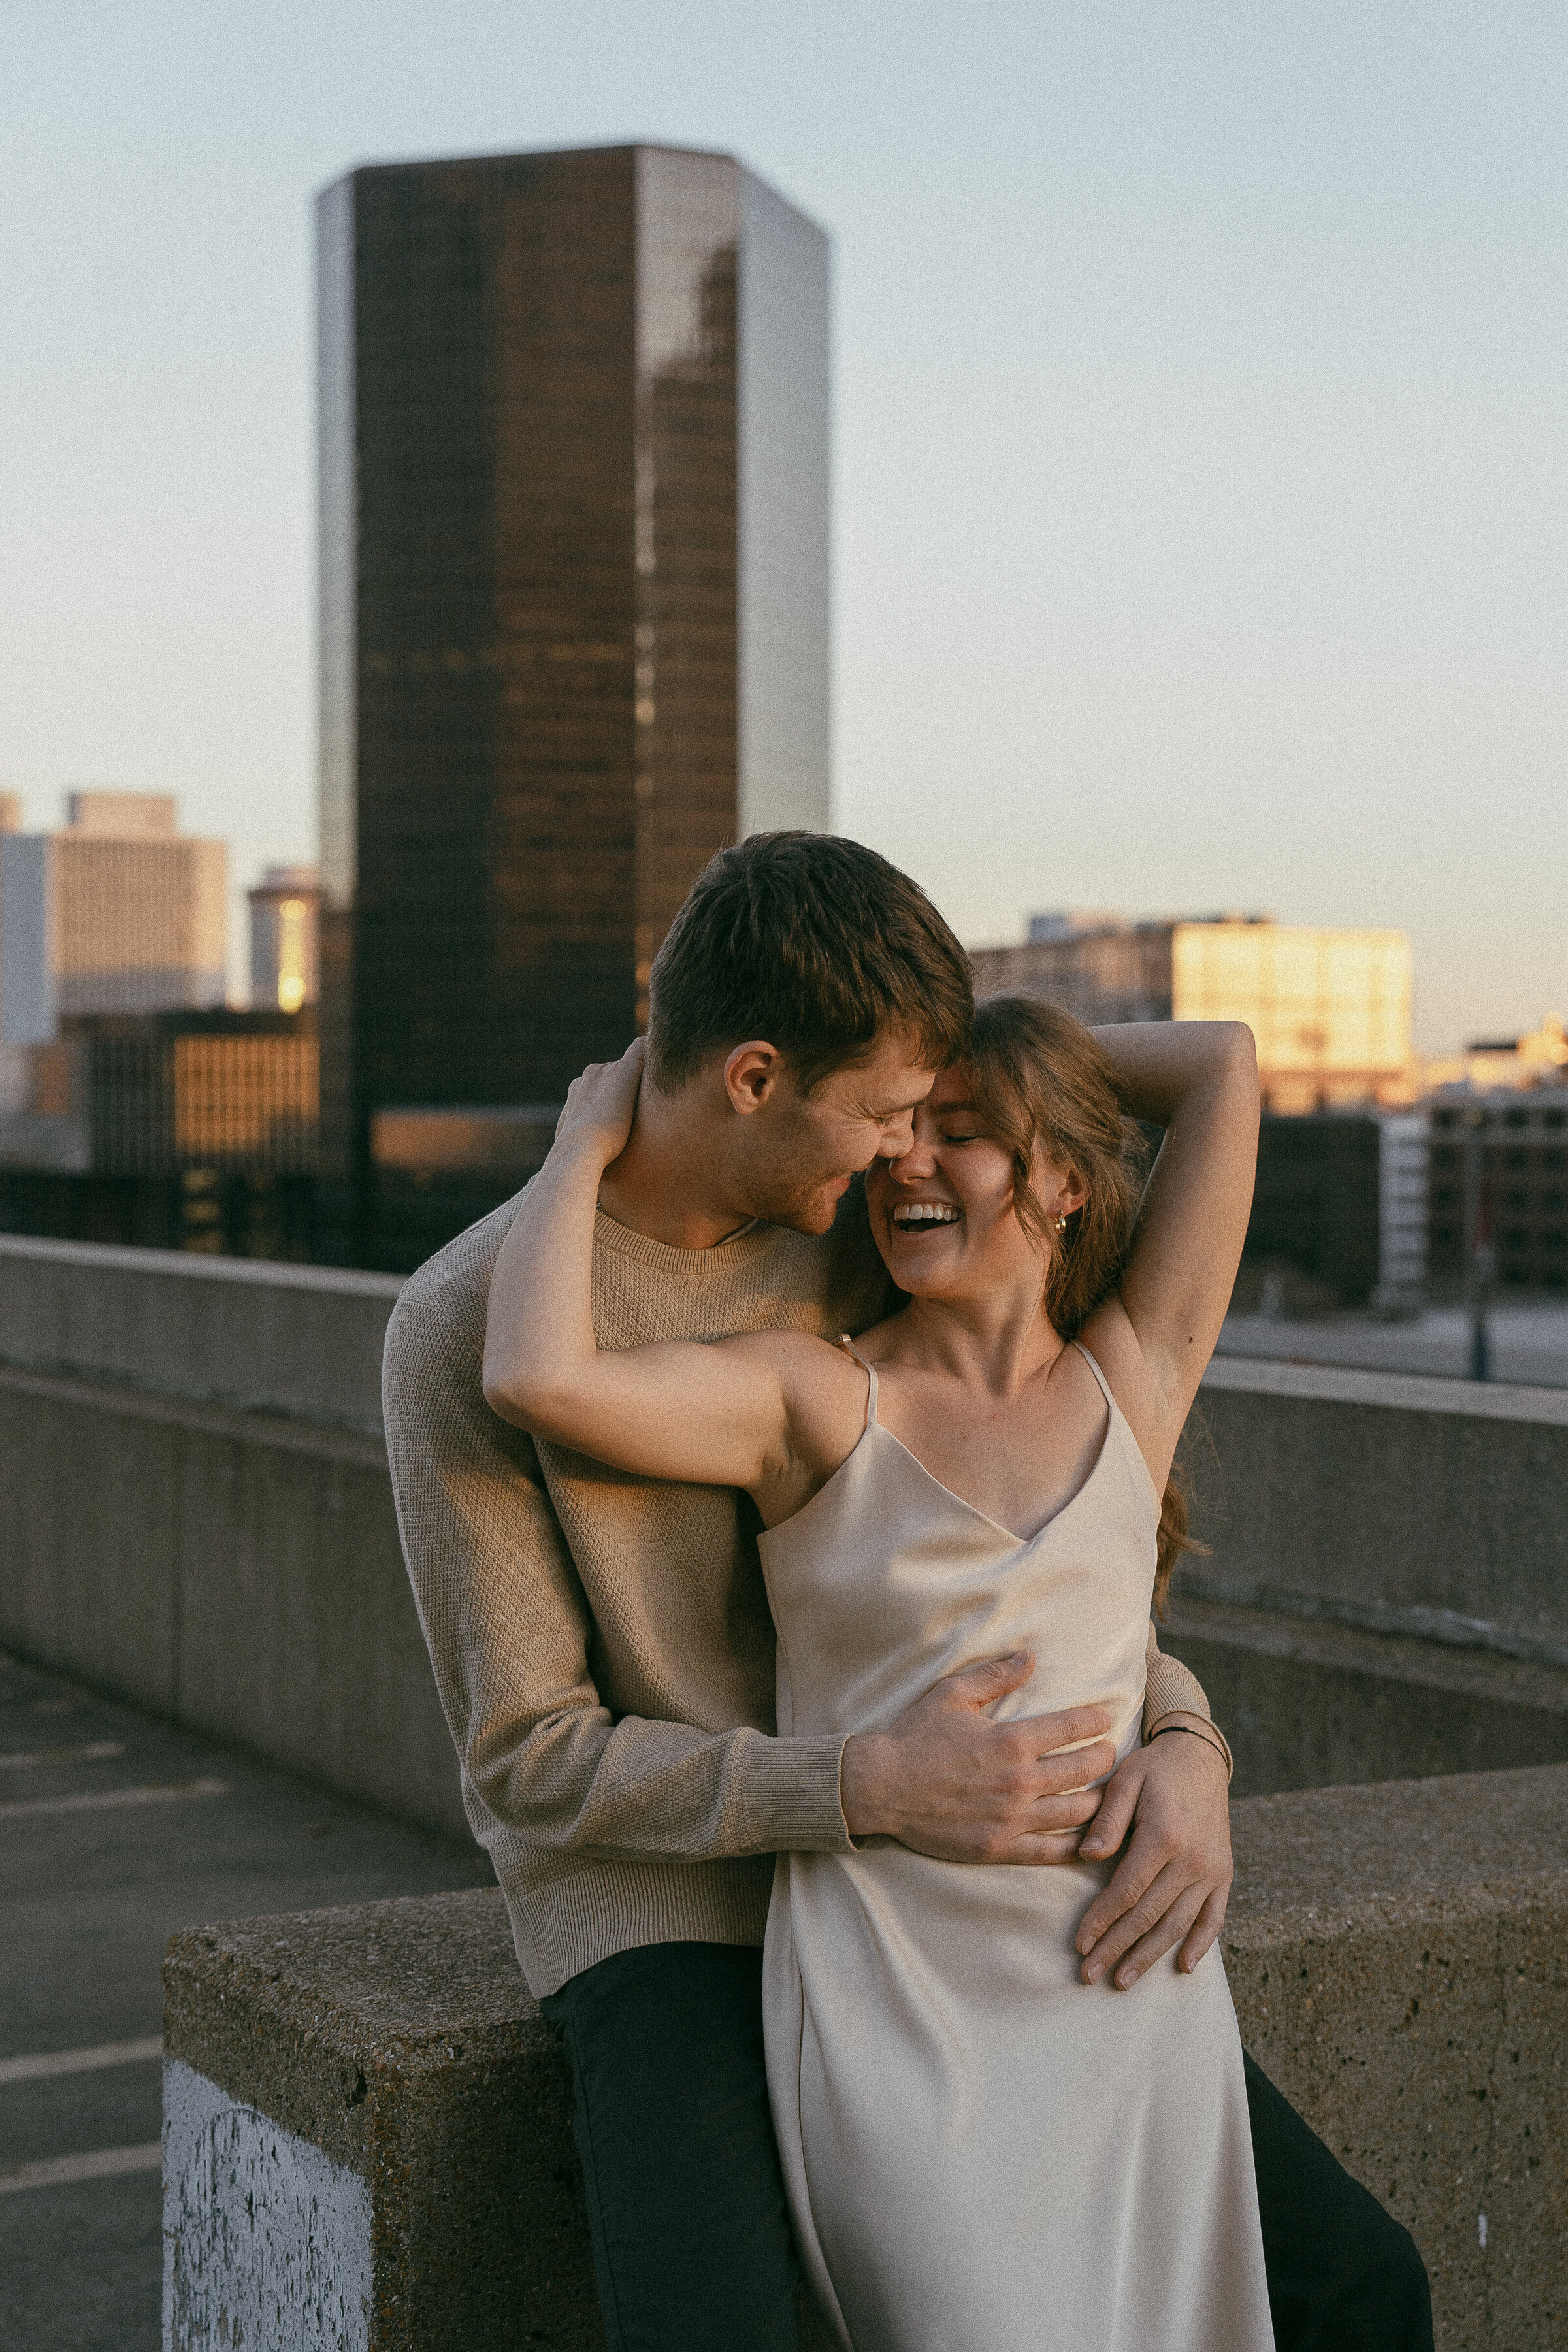 Couple hugging with a city skyline in the background.